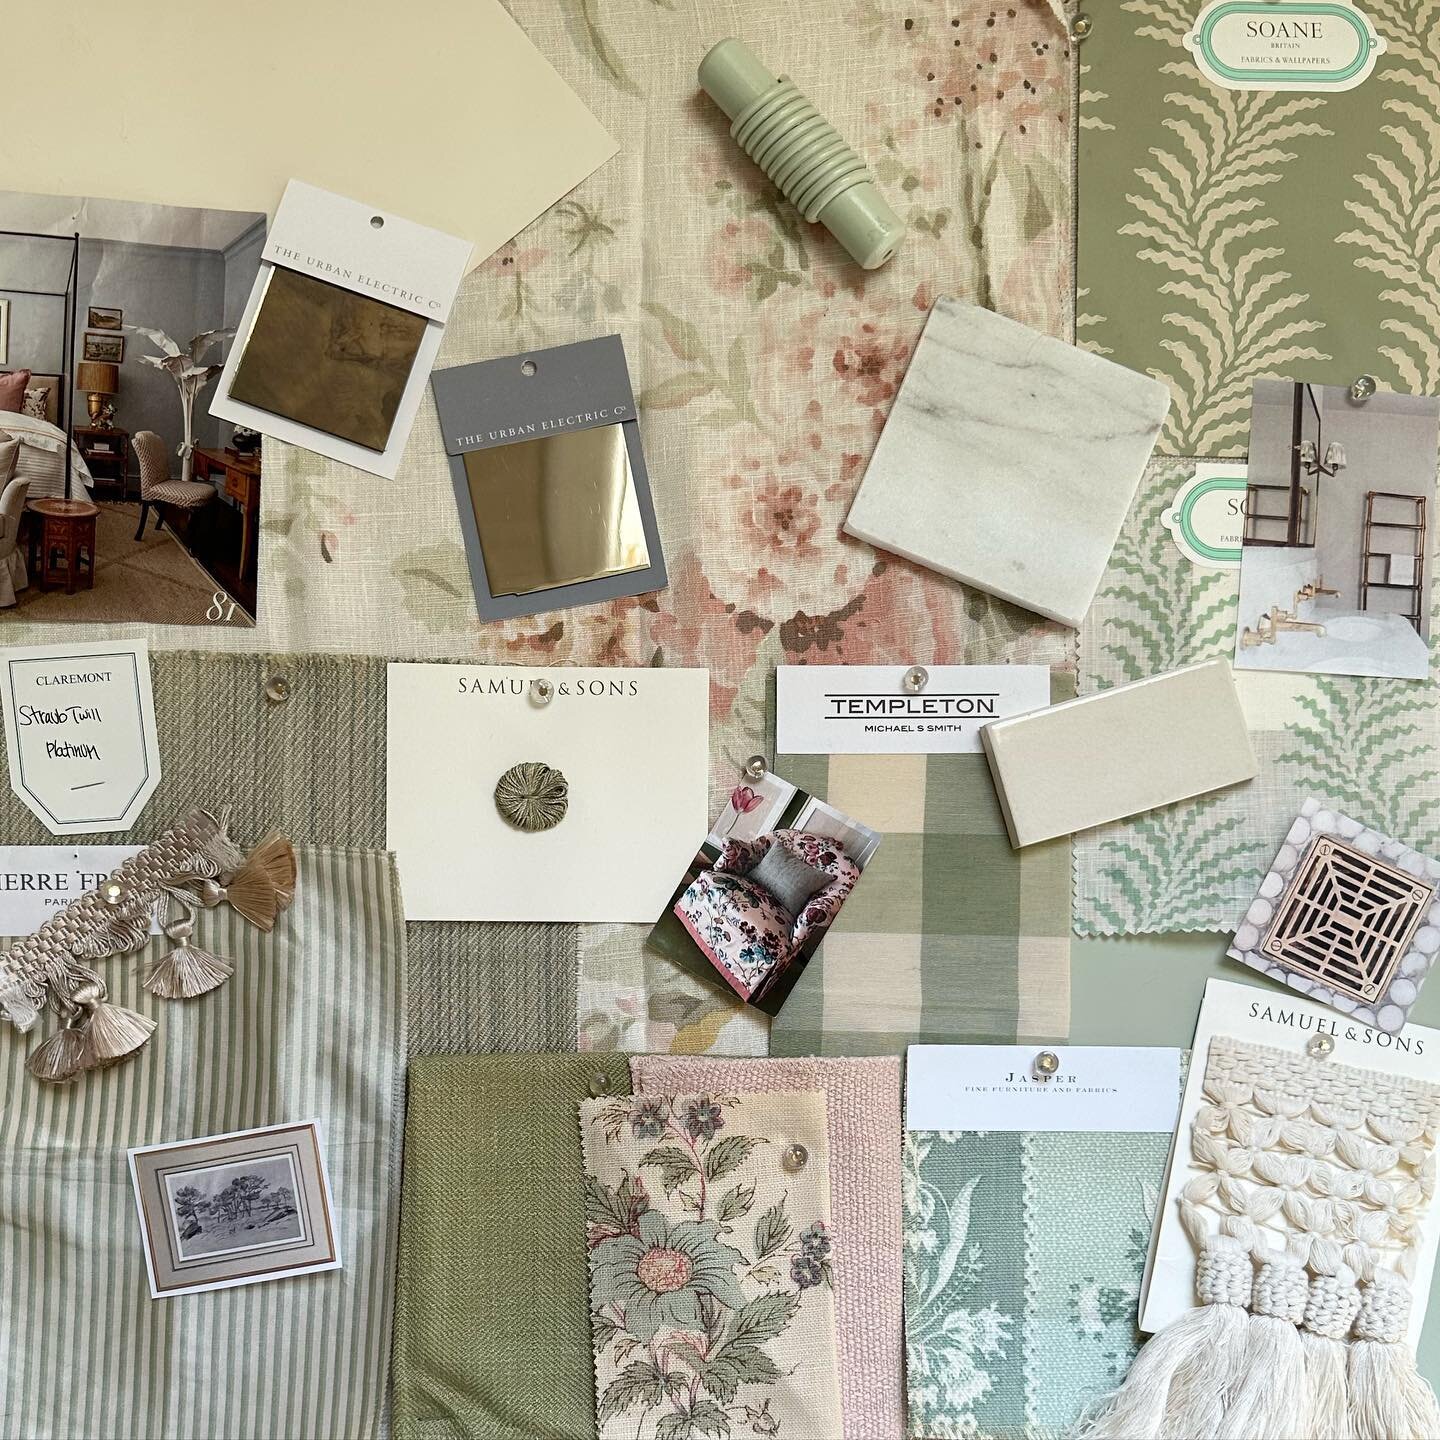 Just about two months until this project begins and to say we&rsquo;re excited is an understatement. Will be sharing more soon! #jkathryninteriors

#interiordesign #interiordesigner #interiorinspiration #interiorinspo #moodboard #designboard #layered